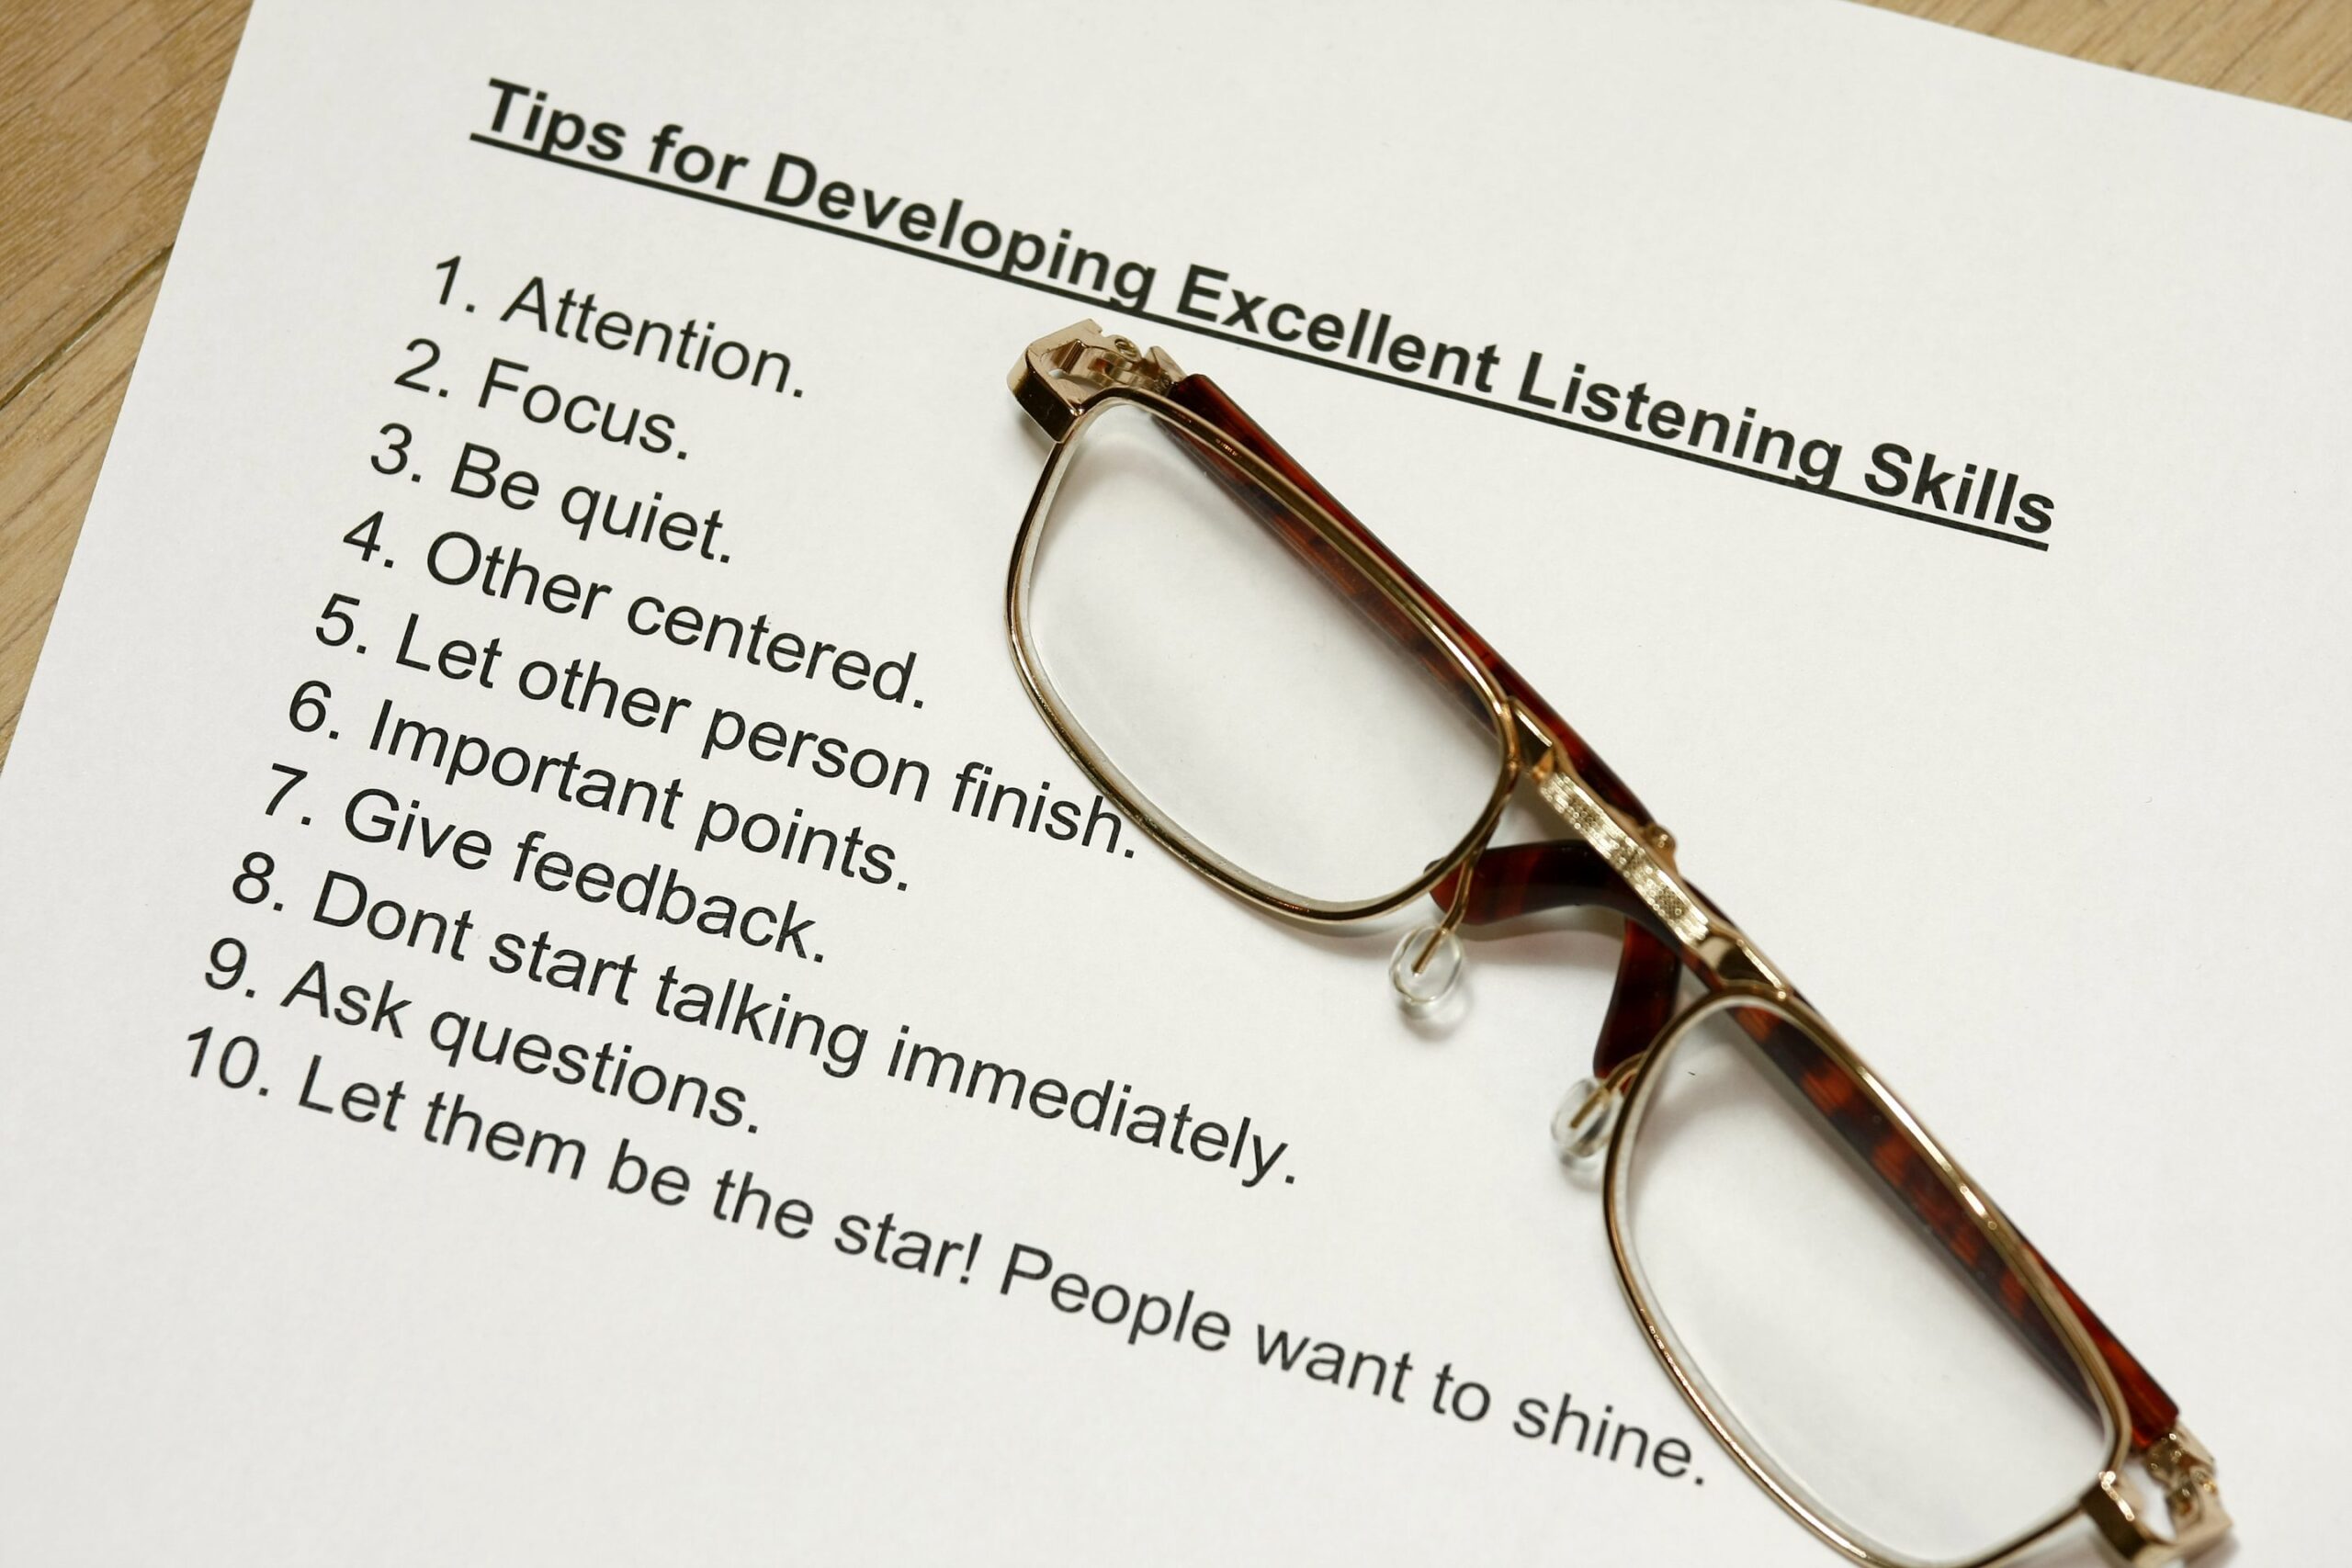 Tips To Develop Listening Skills - CTO Academy